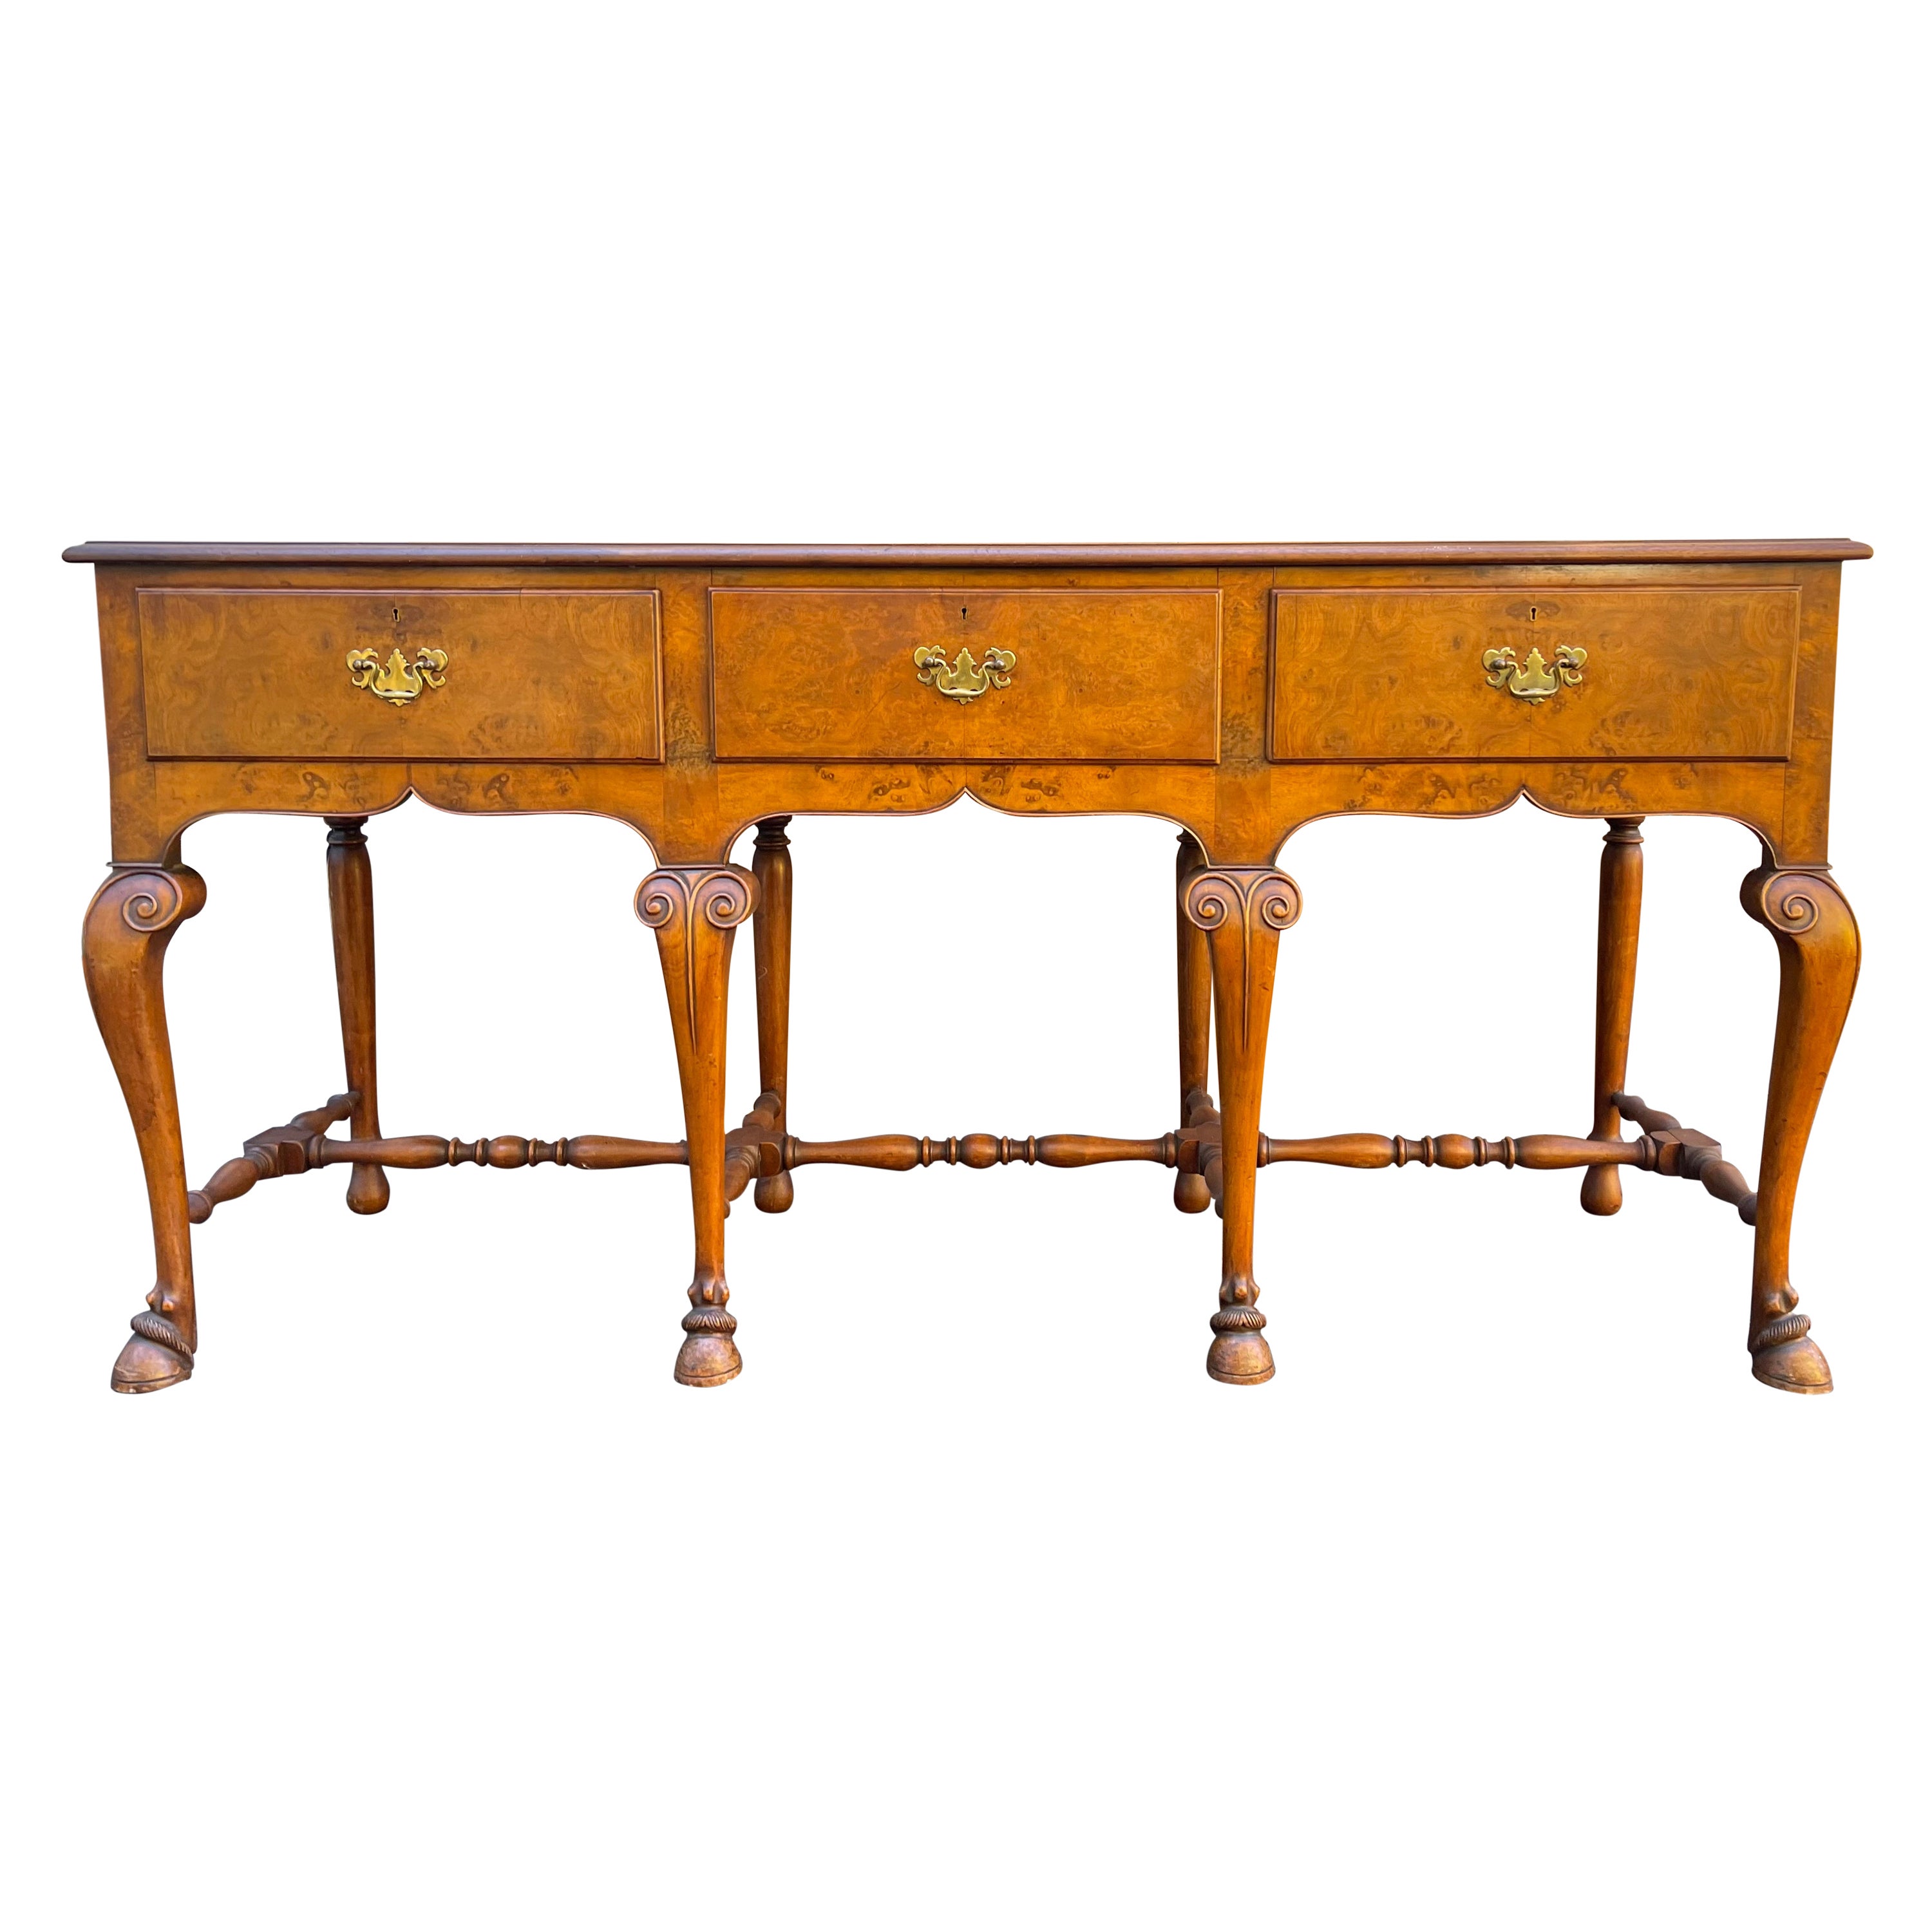 Italian Renaissance Style Credenza Sideboard For Sale At 1stdibs